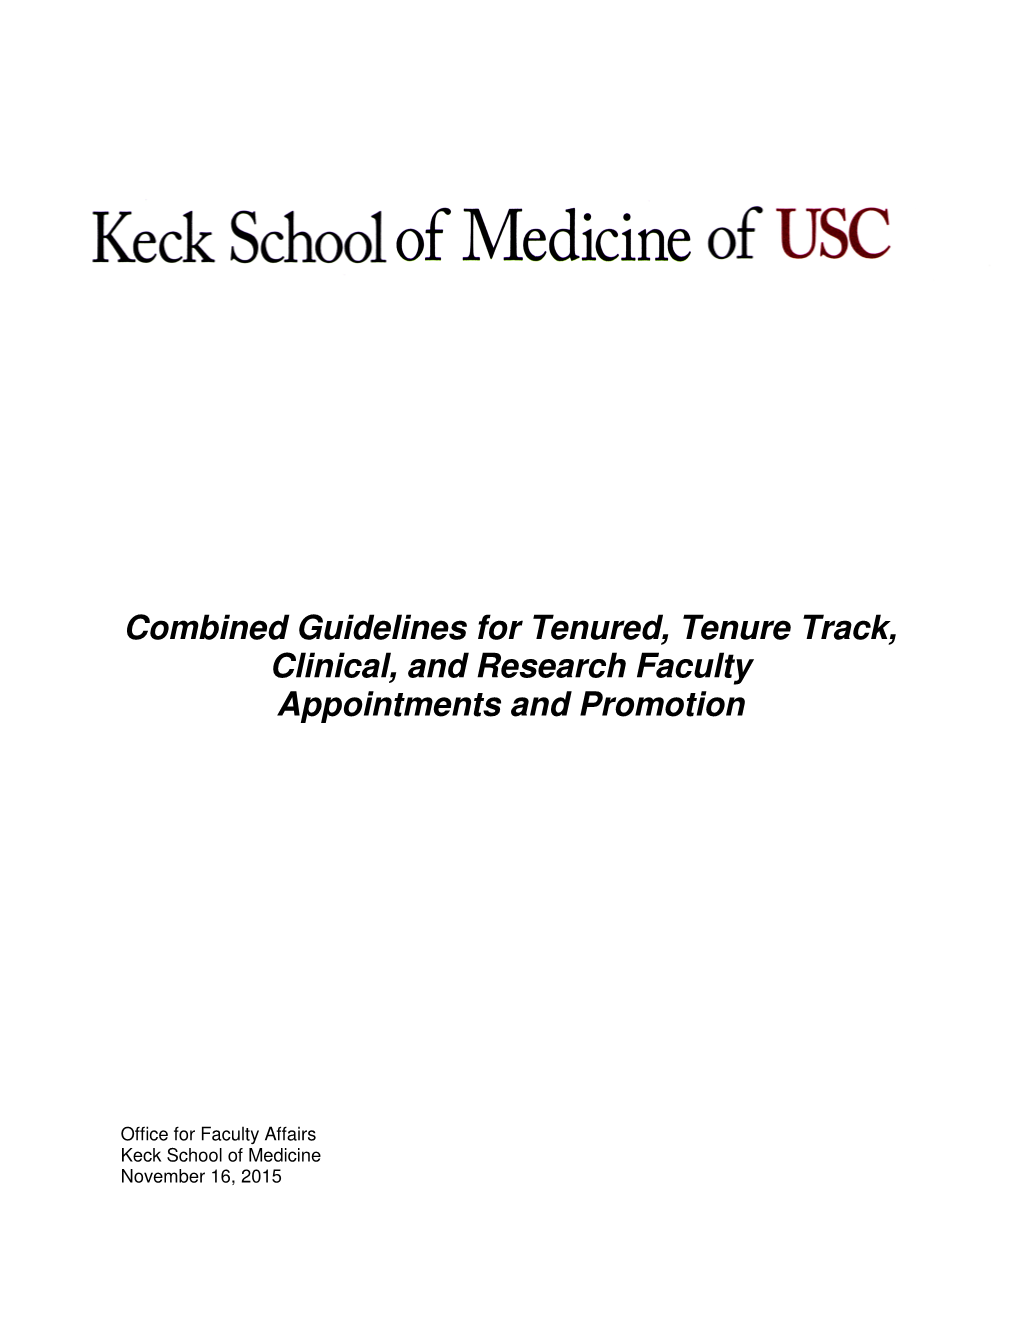 Combined Guidelines for Tenured, Tenure Track, Clinical, and Research Faculty Appointments and Promotion